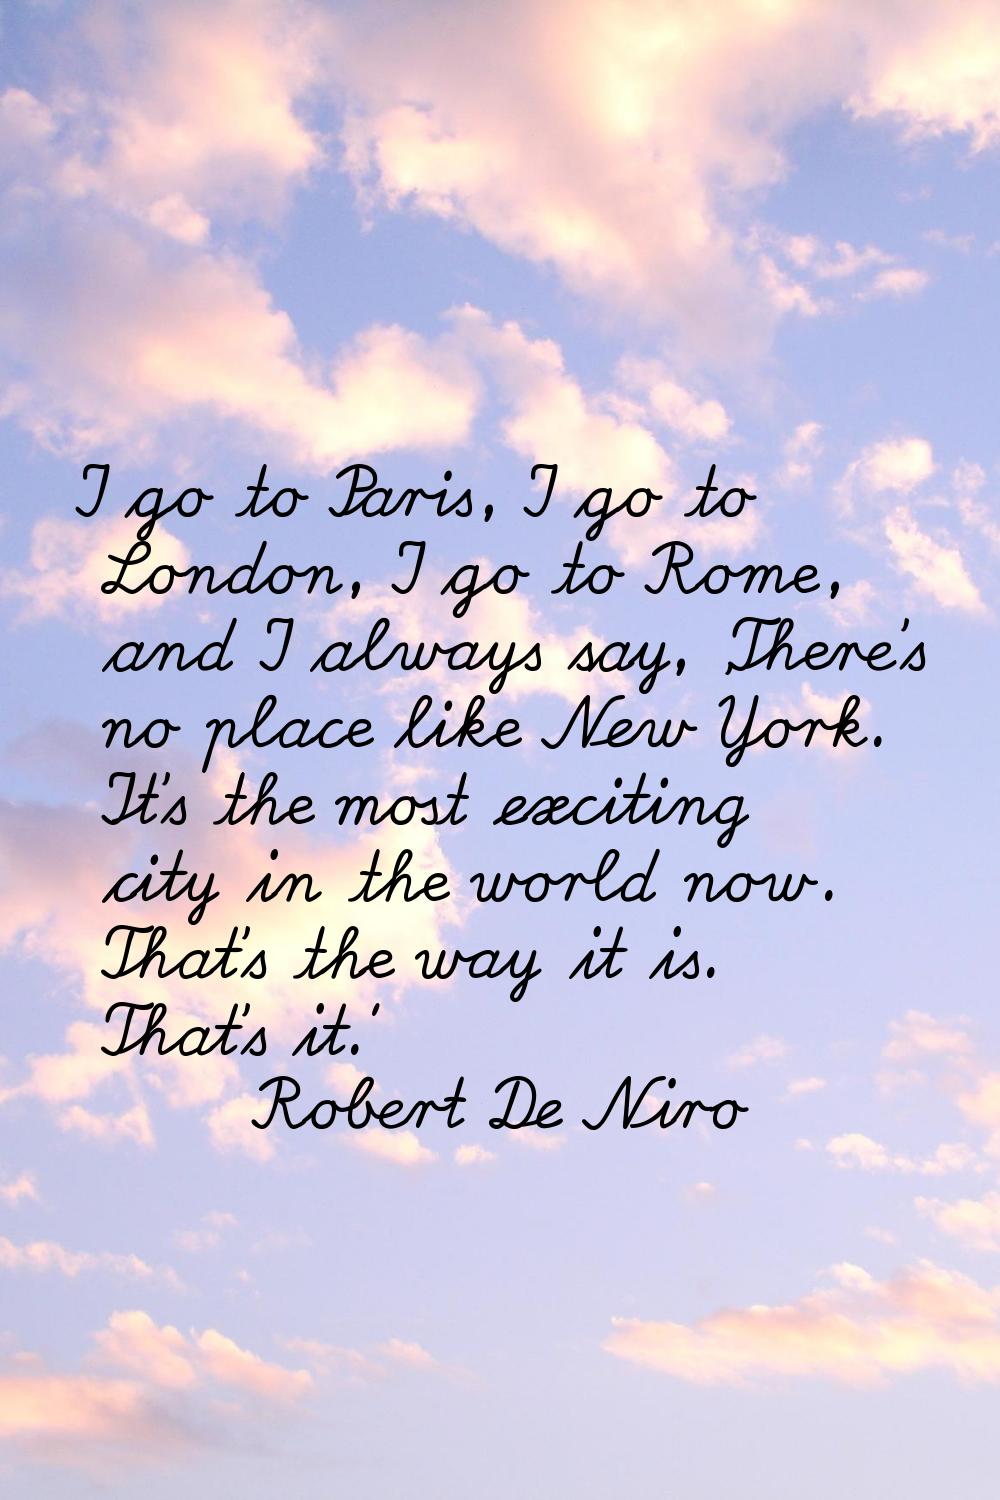 I go to Paris, I go to London, I go to Rome, and I always say, 'There's no place like New York. It'